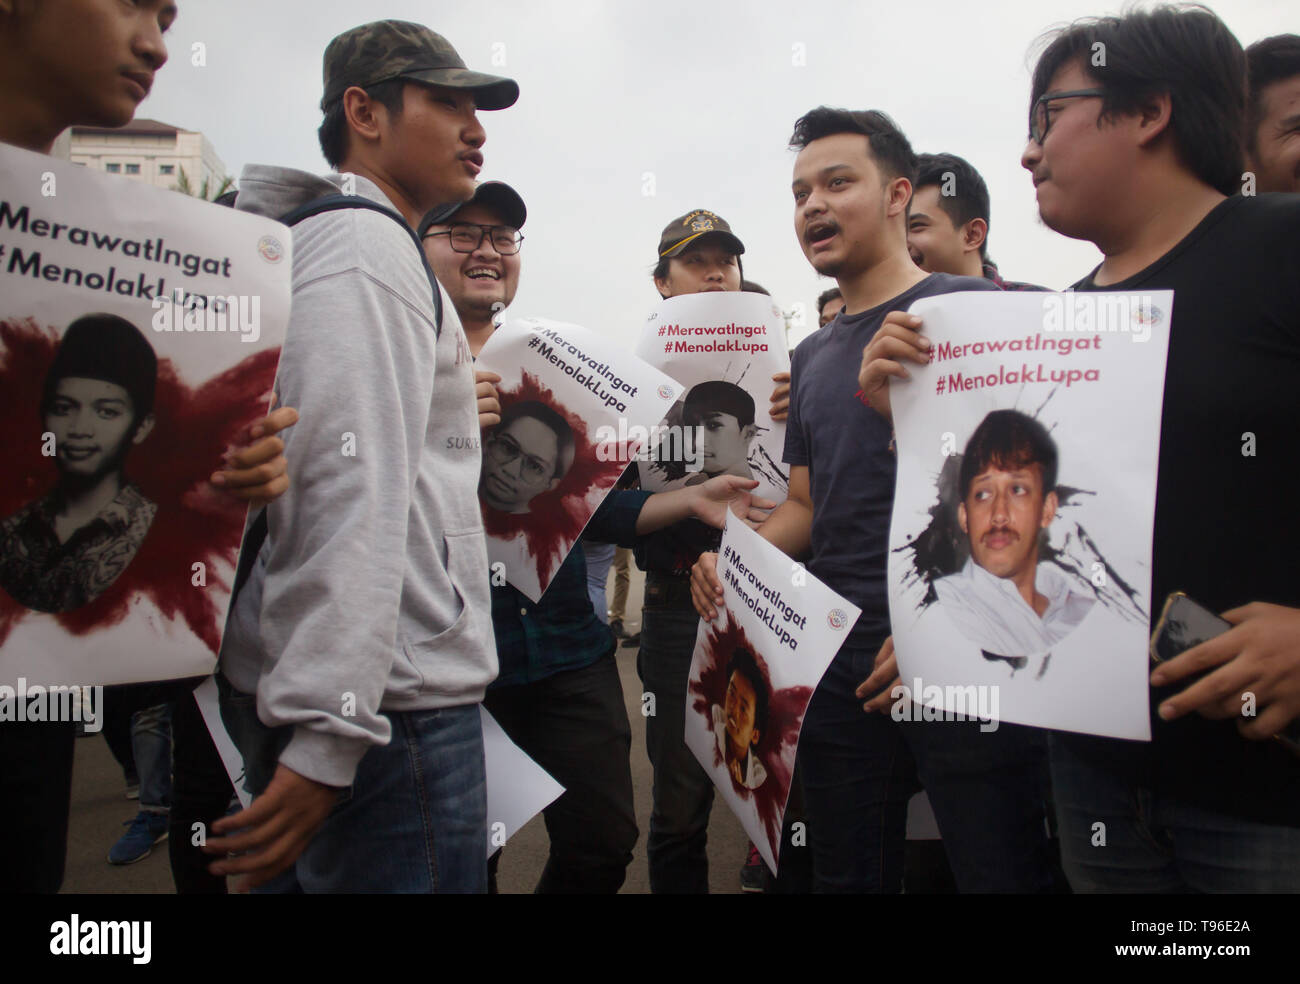 Demonstrators seen with posters of Munir and Benardinus Irawan victims of human rights violations during the protest. The Victim Solidarity Network for Justice (JSKK) held a silent protest in front of the Presidential Palace in Jakarta. The act is commonly known as Aksi Kamisan and this was its 586th day and the demand is for the President to resolve human rights violations in the May 1998 Tragedy: Trisakti - Semanggi I - Semanggi II and May 13-15 1998 Riots. Stock Photo